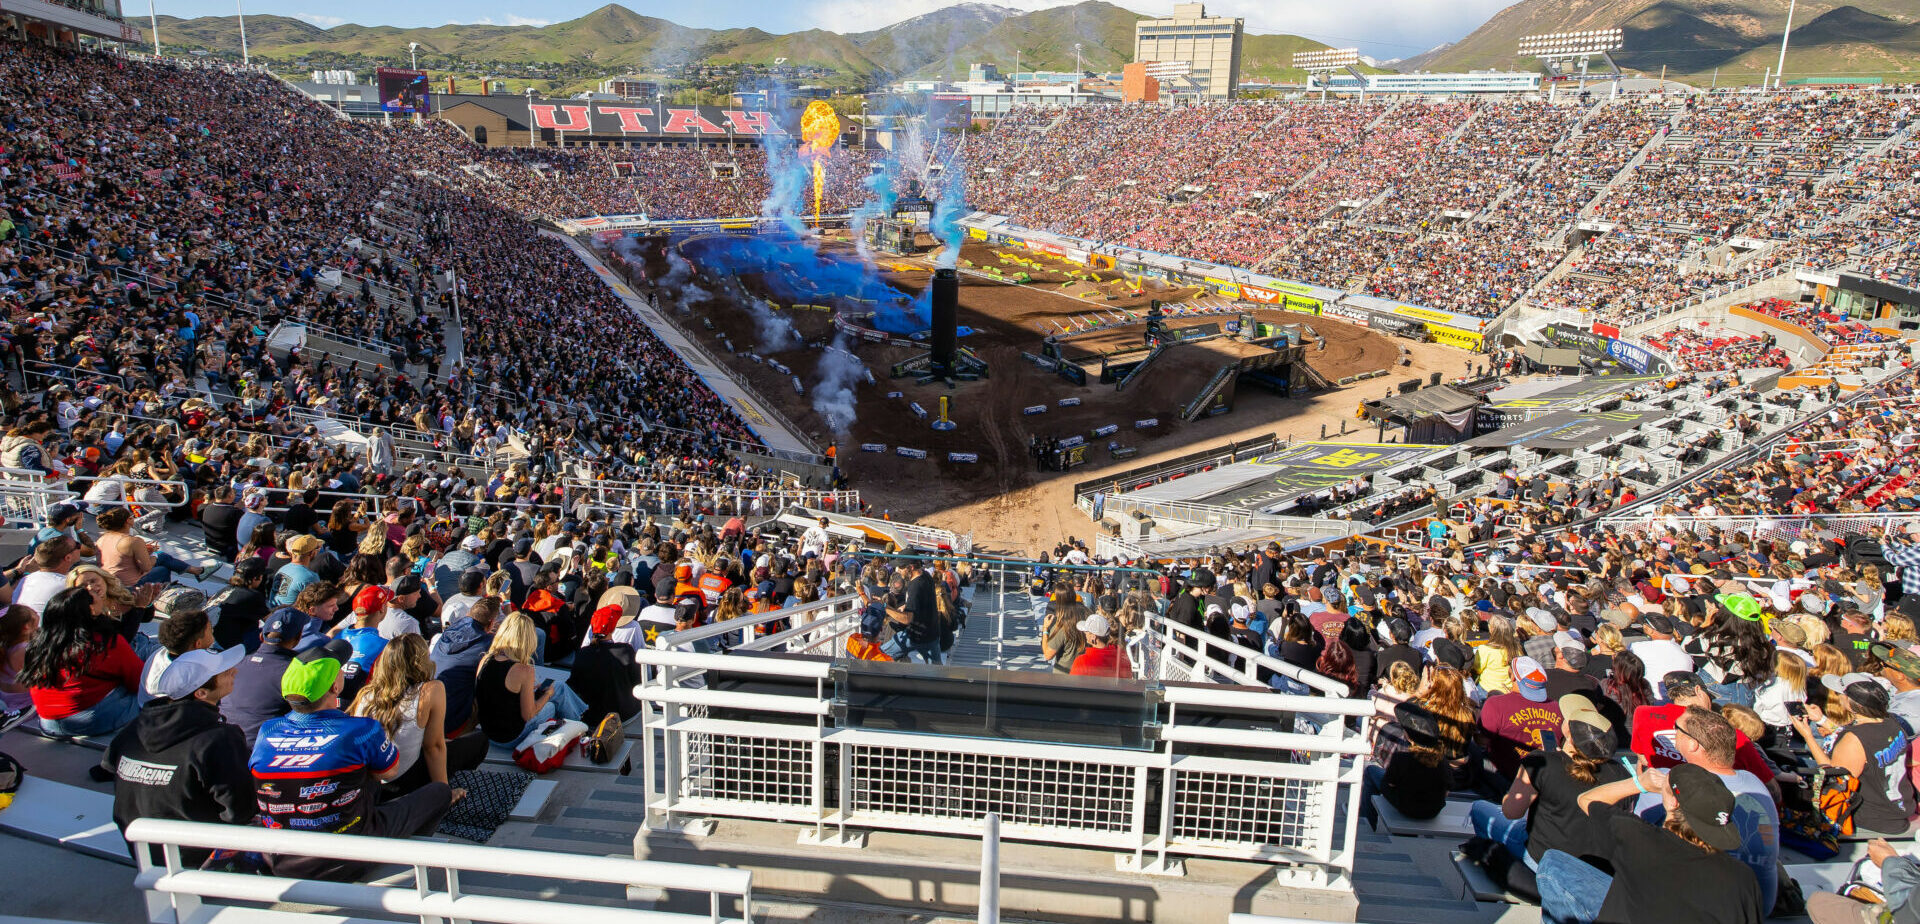 Rice-Eccles Stadium hosted the Monster Energy AMA Supercross Final for the fifth straight year. A weather delay temporarily paused the racing, but the storm passed, and the track provided great racing to crown four Supercross championships. Photo courtesy Feld Motor Sports, Inc.  